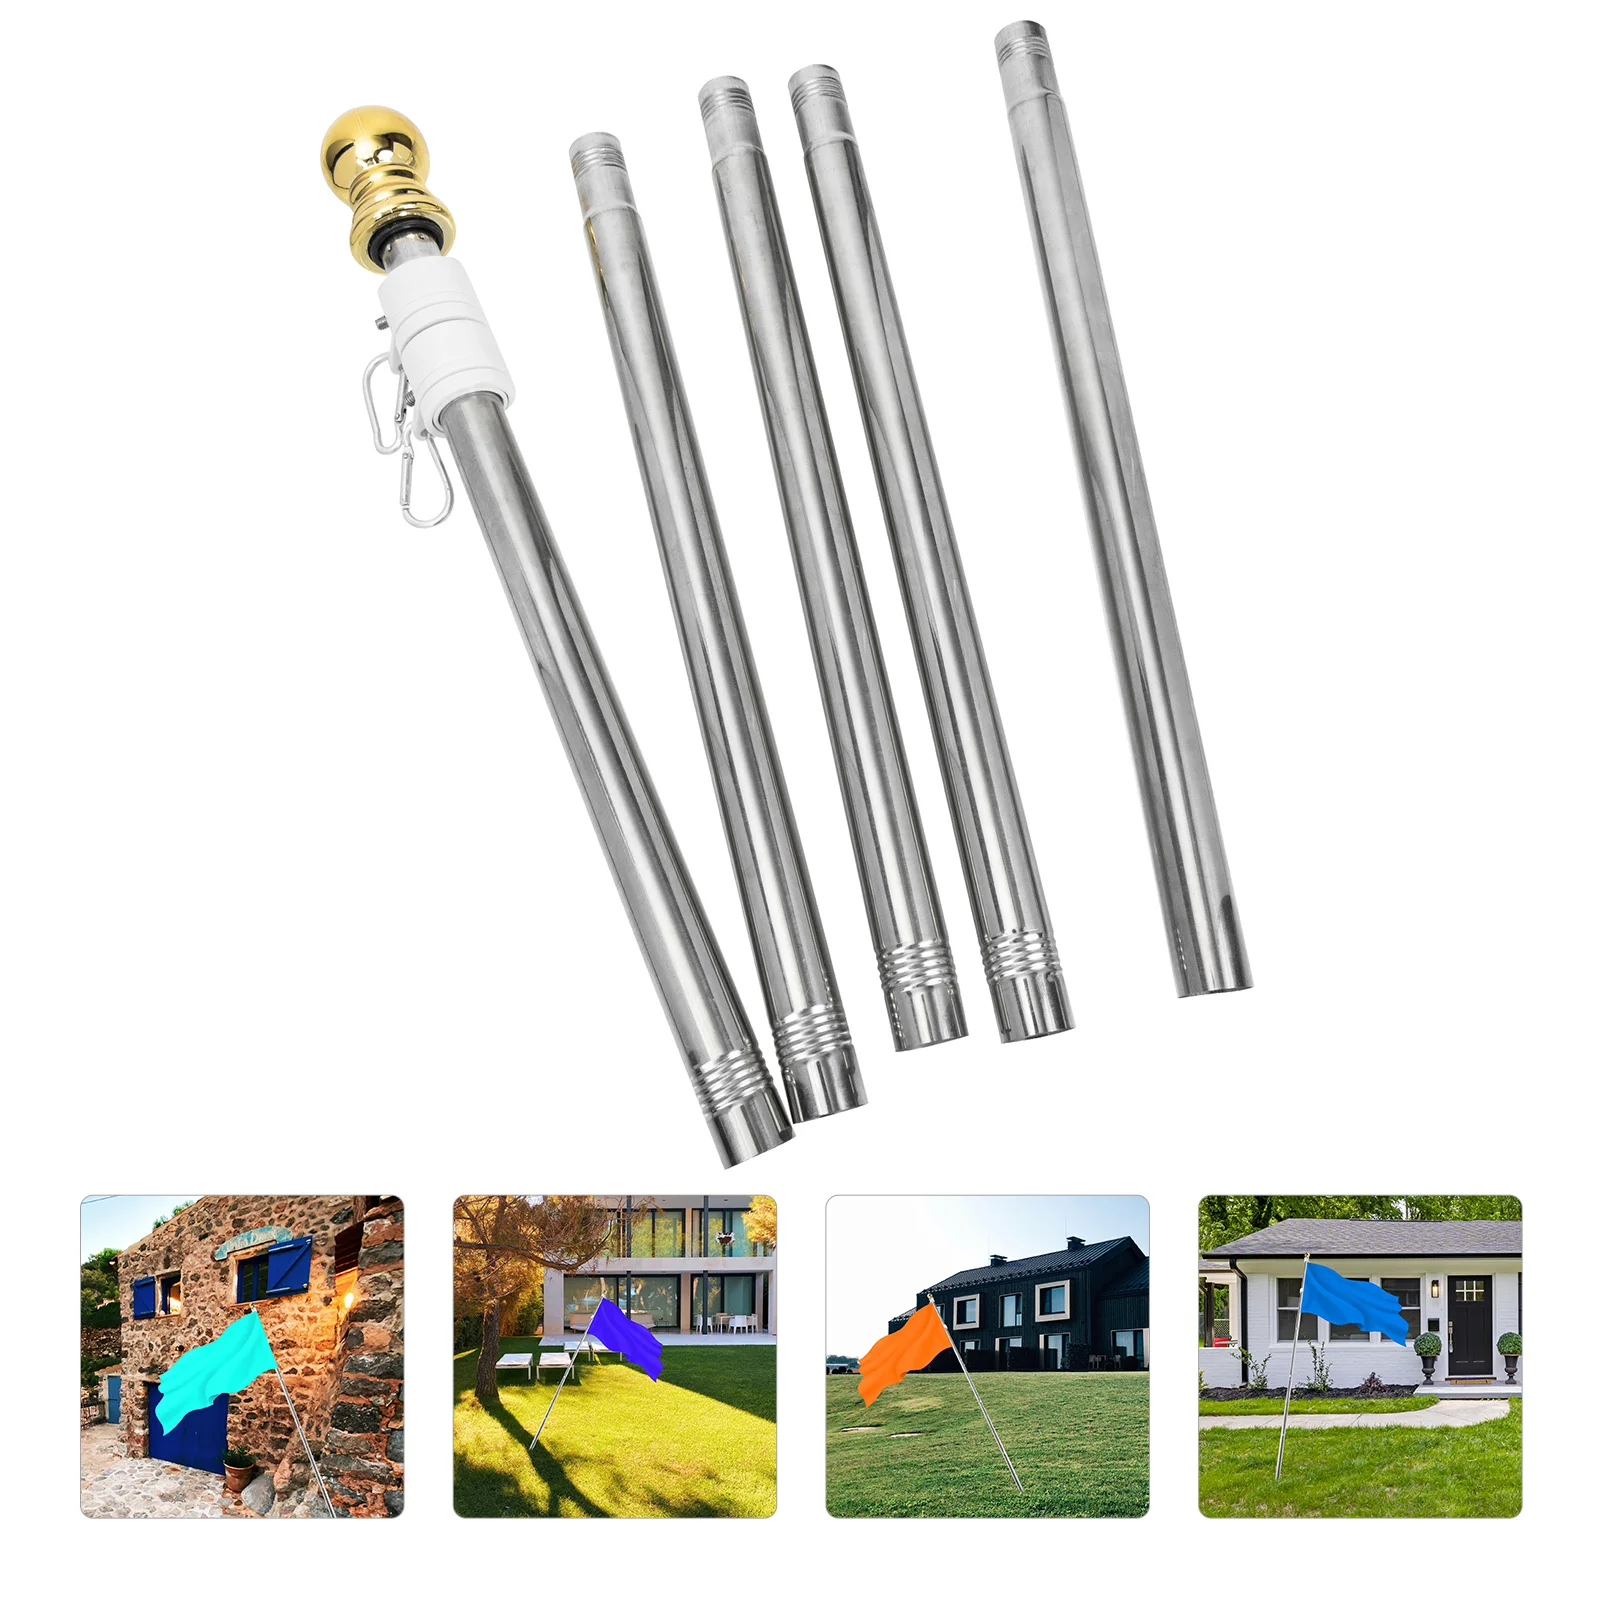 

1 Set of Rotatable Flag Pole Stainless Steel Dechtable Flagpole Kit for Outdoor